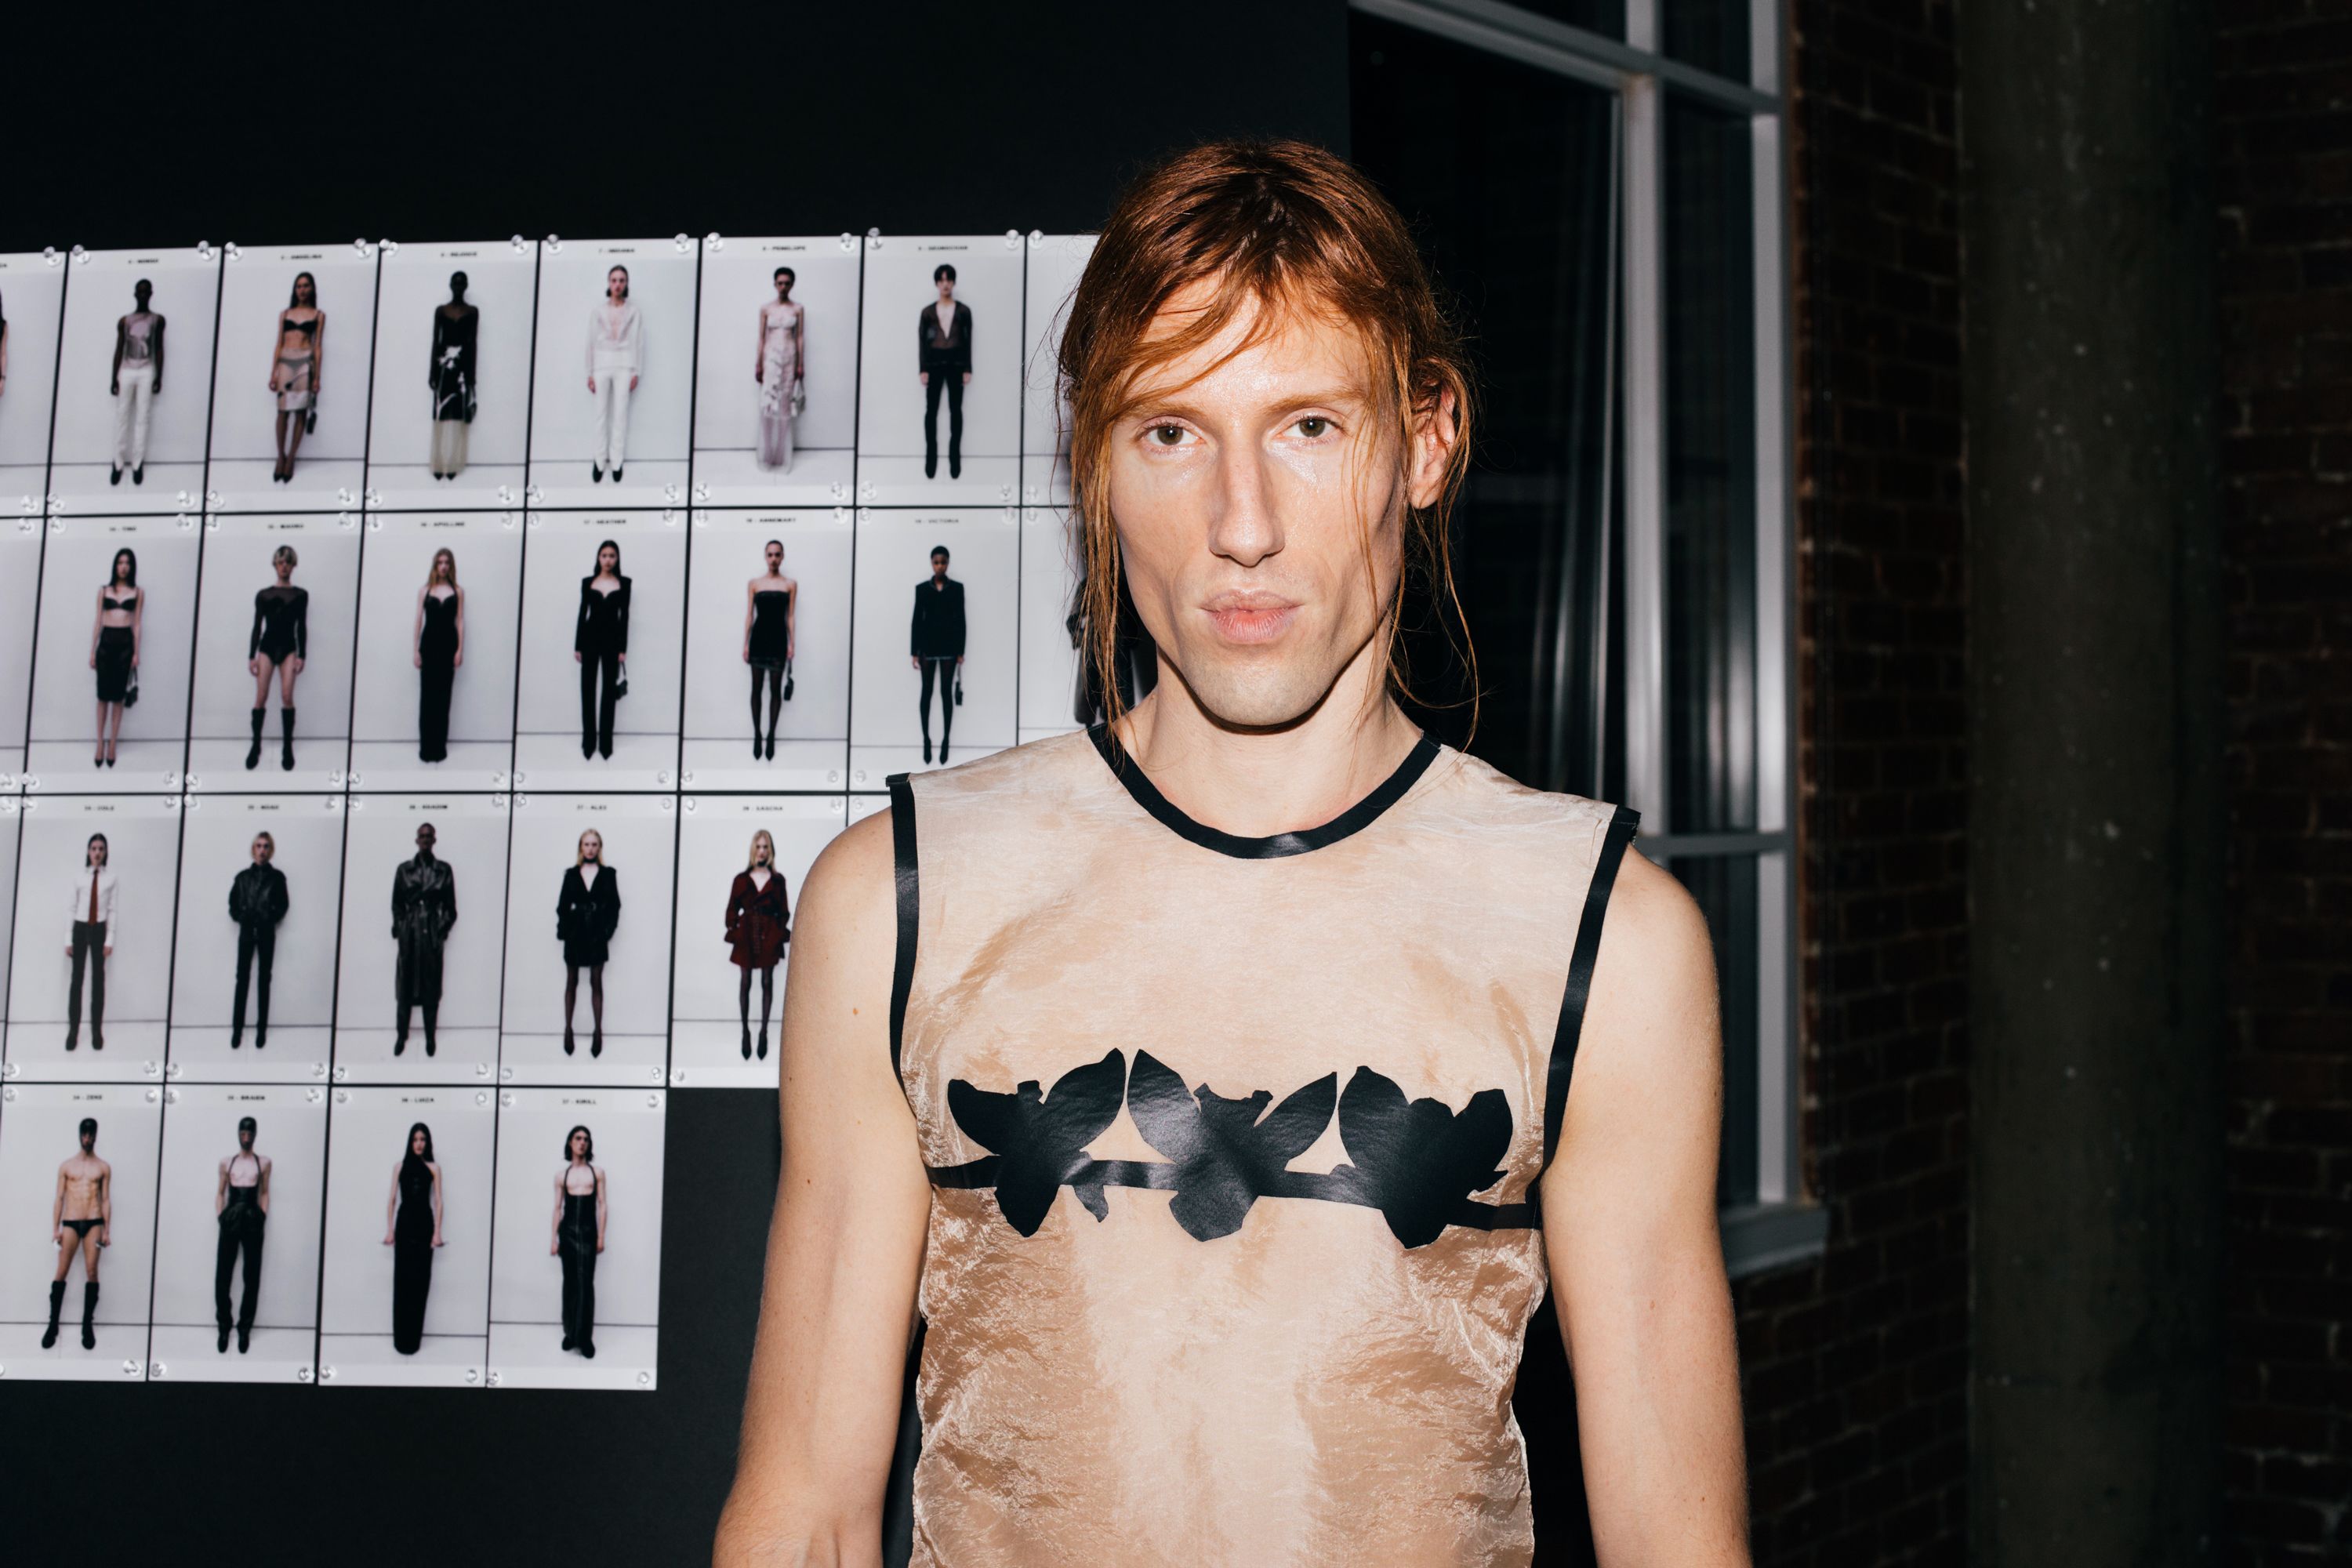 Ludovic de Saint Sernin makes New York Fashion Week debut with polished  BDSM-inspired collection